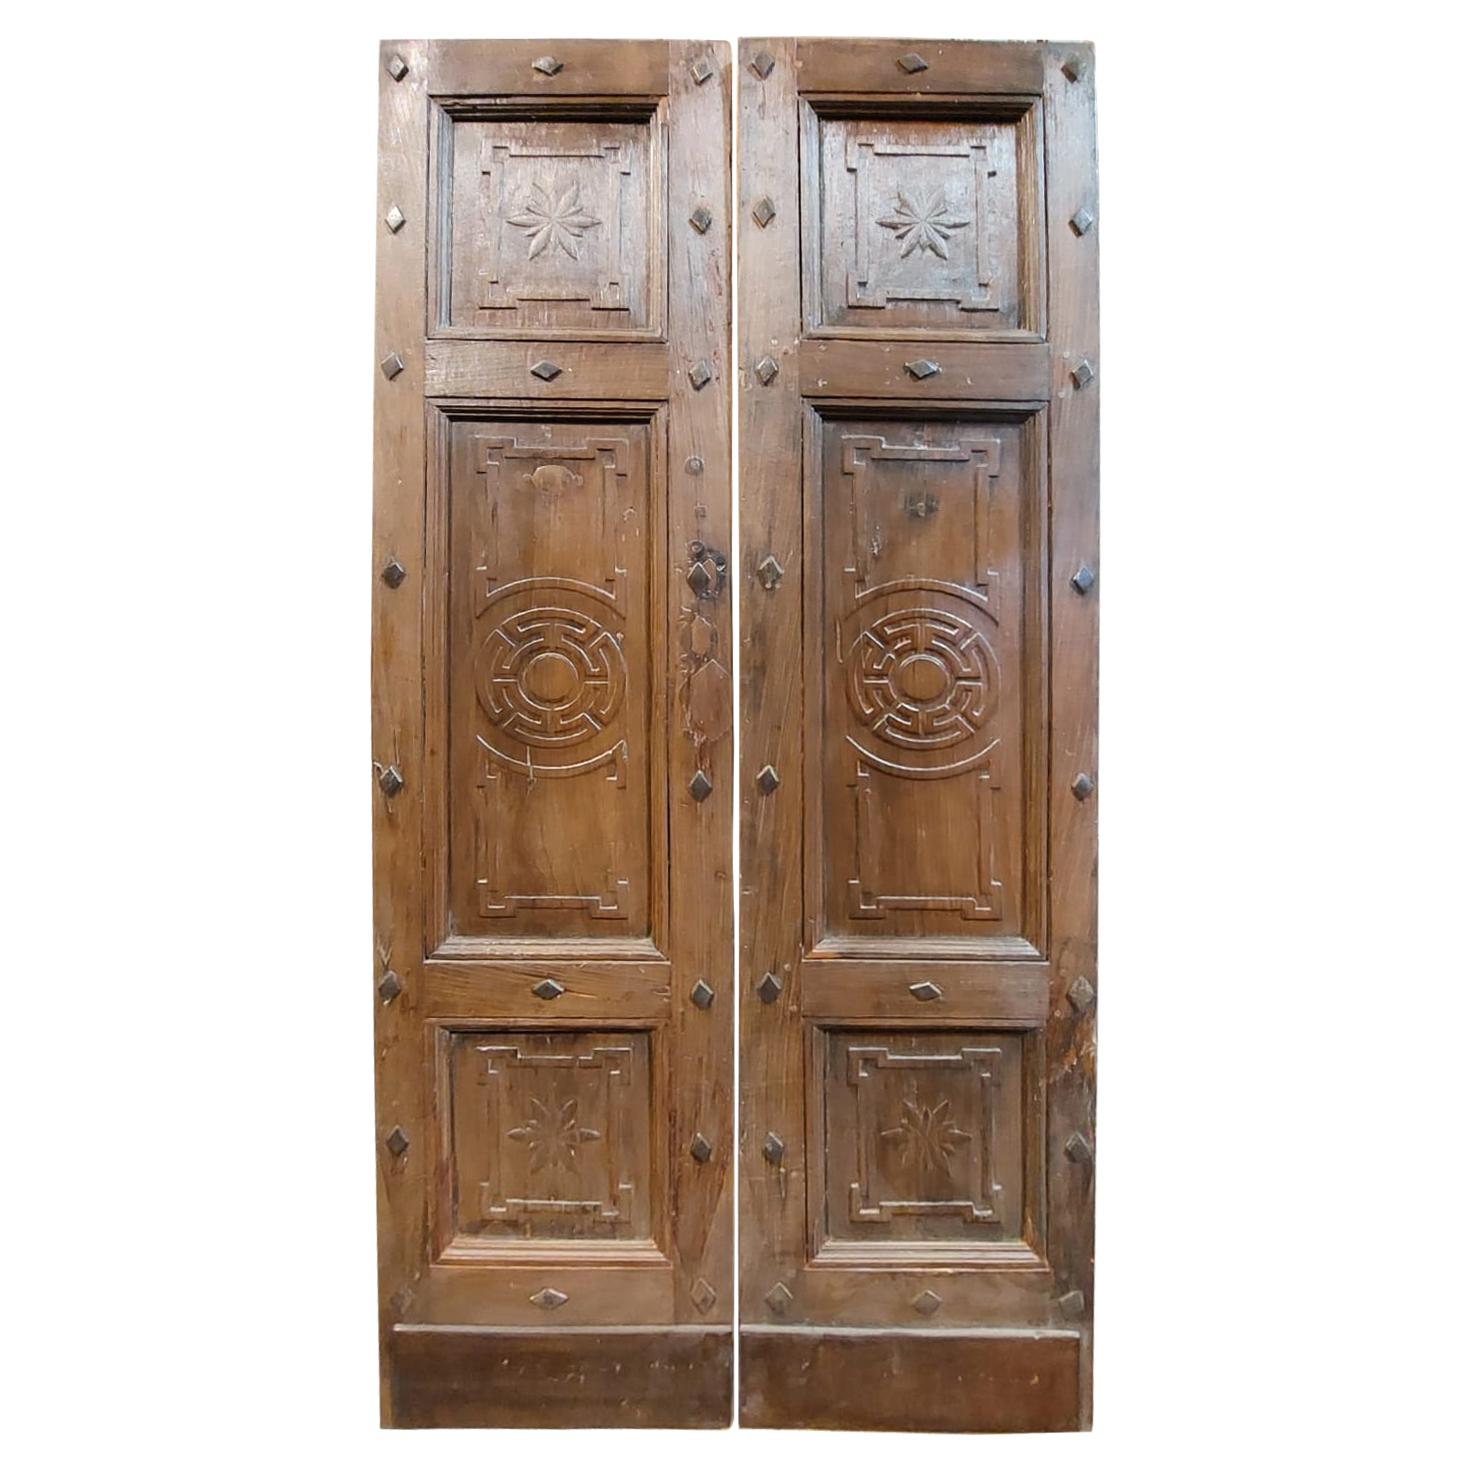 Antique Entrance Door in Walnut with Carved Decorations, 19th Century, Italy